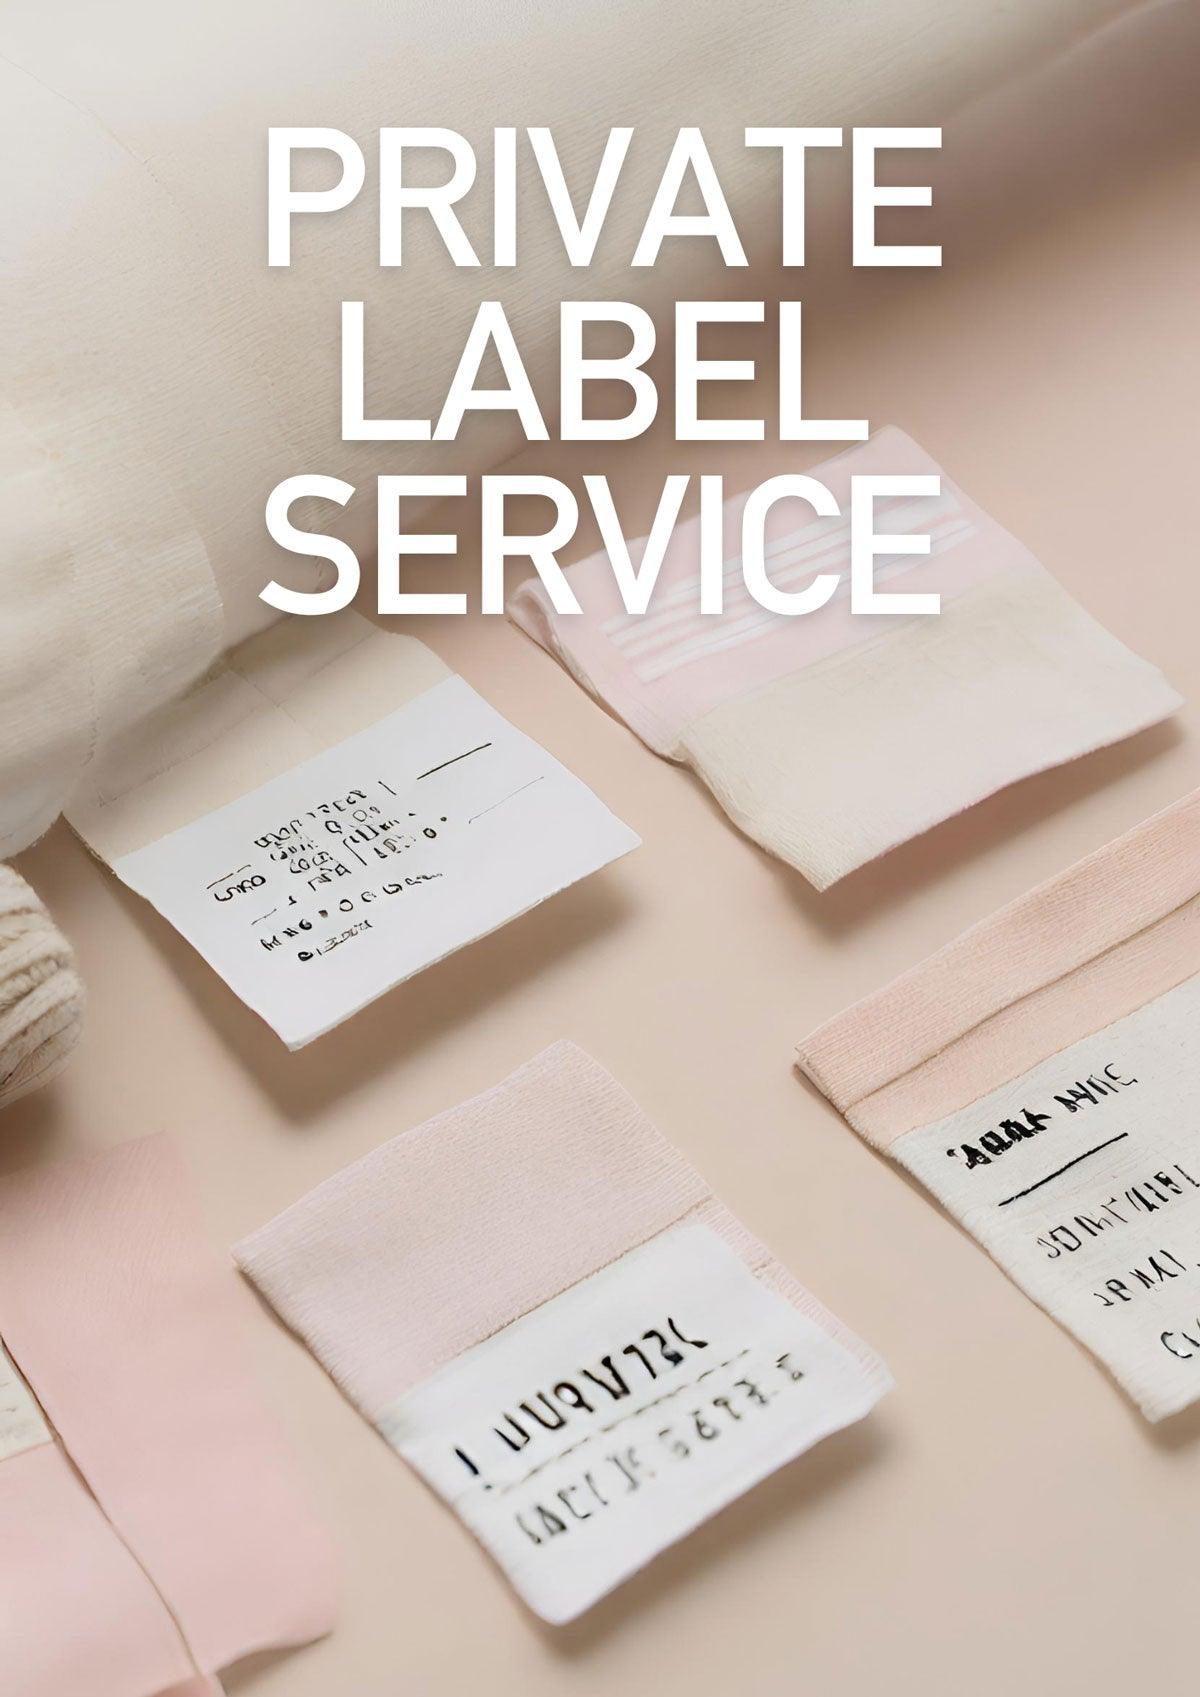 Private Labeling Services for Wholesale Clothing Buyers